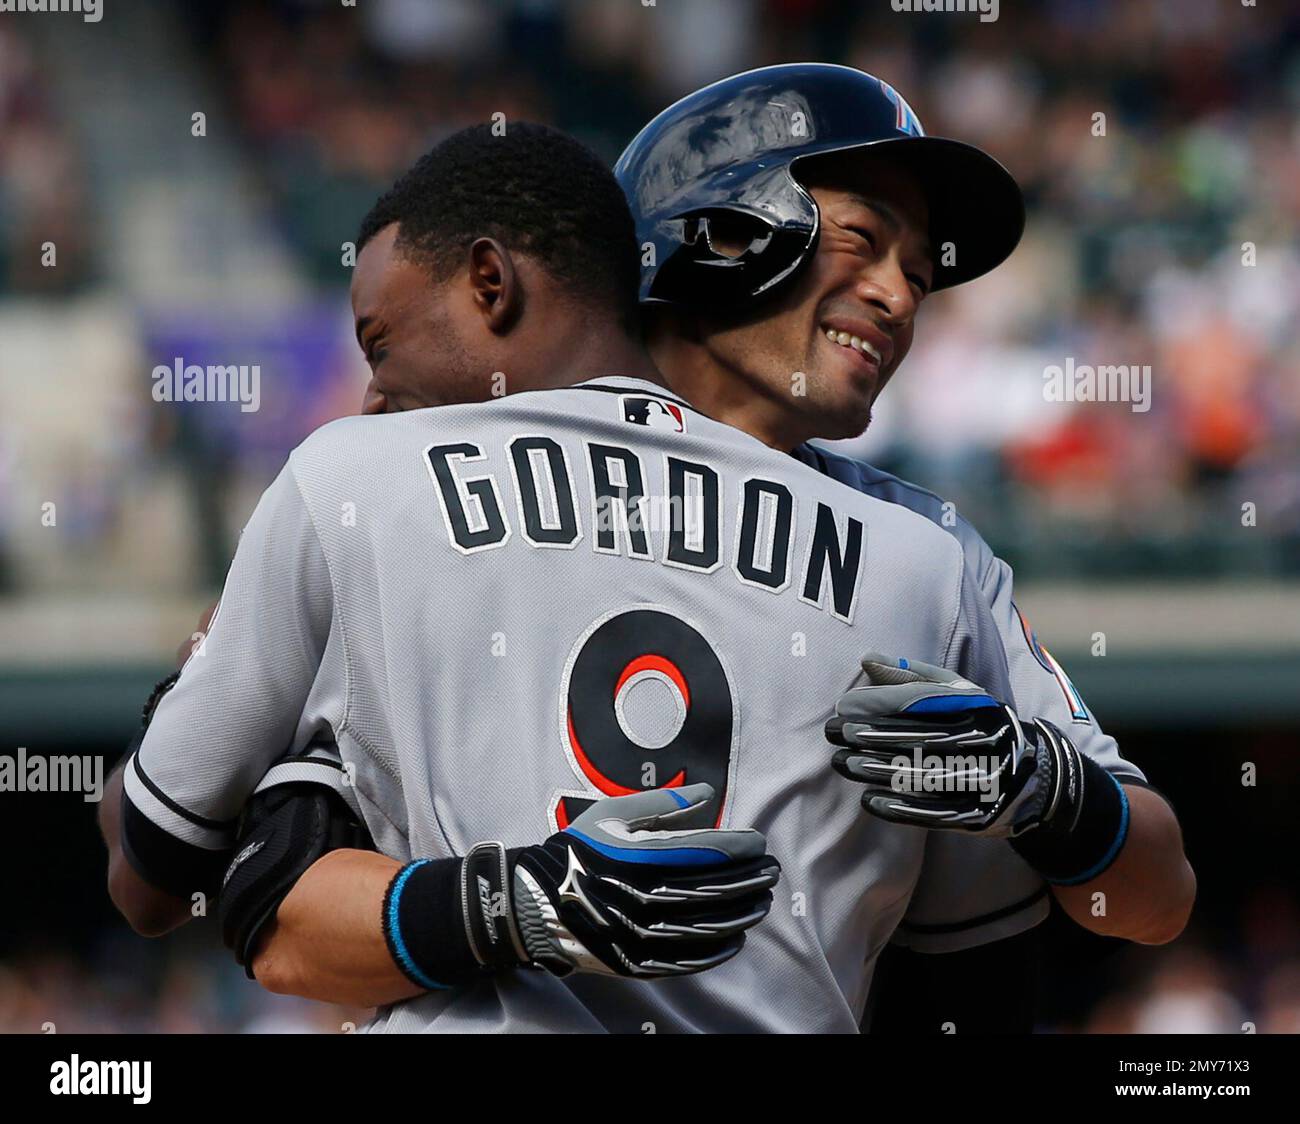 Miami Marlins' Ichiro Suzuki hugs a teammate after recording in the 7th  inning of the game against the Colorado Rockies to get his 3,000th career  hit in the major leagues at Coors